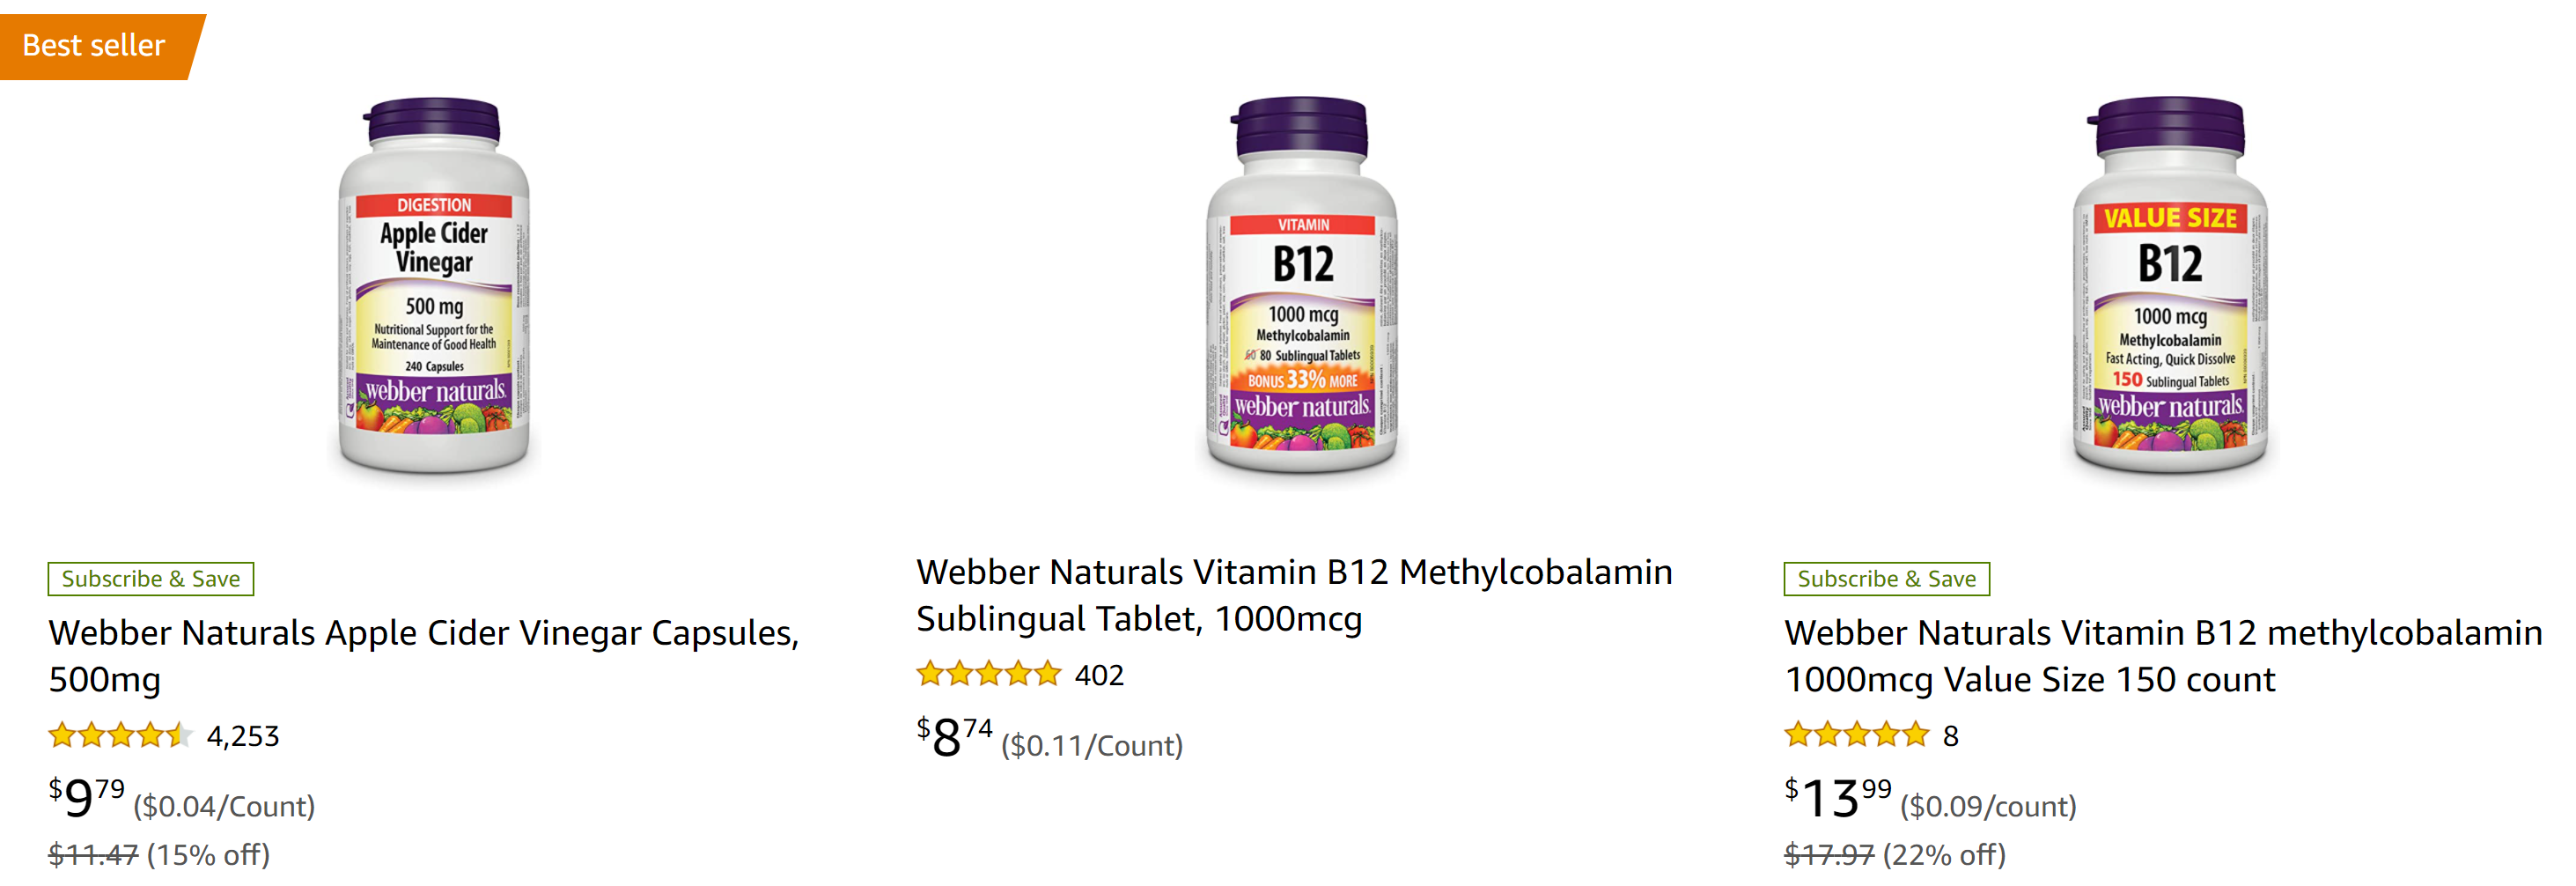 webber-naturals-health-products-as-low-as-70-off-1297-fish-oil-2020-12-30